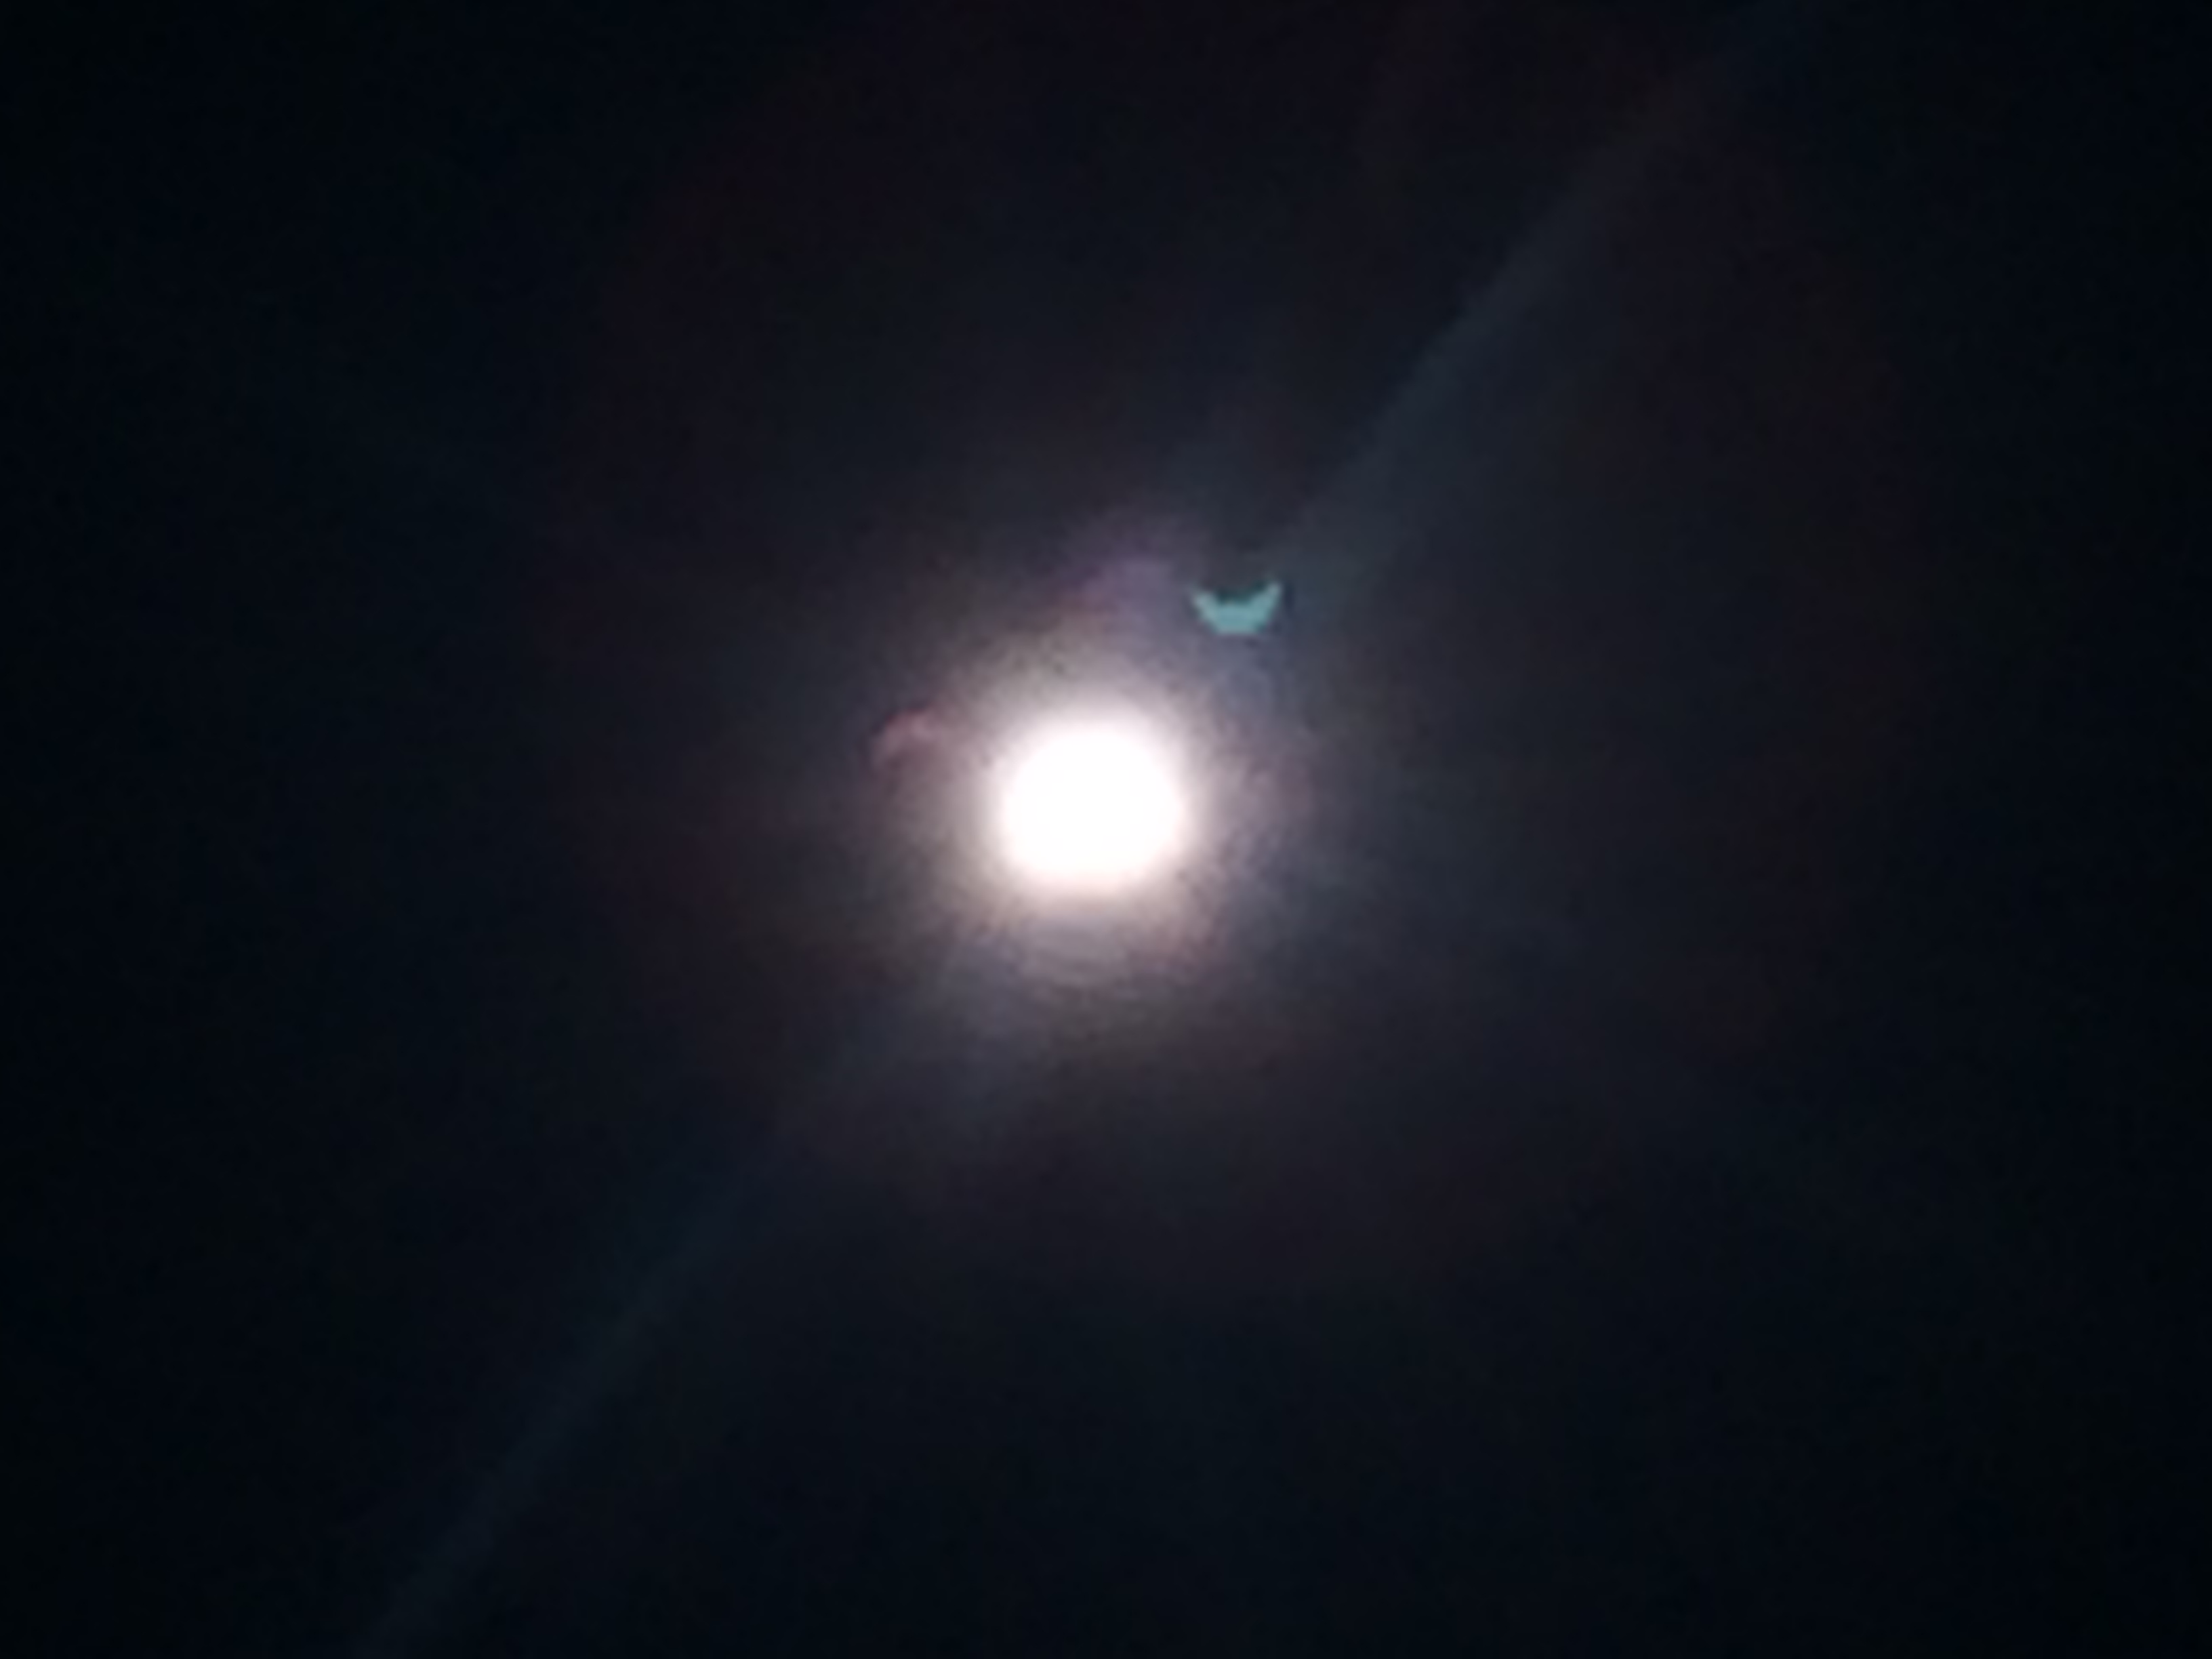 Eclipse in lens flares